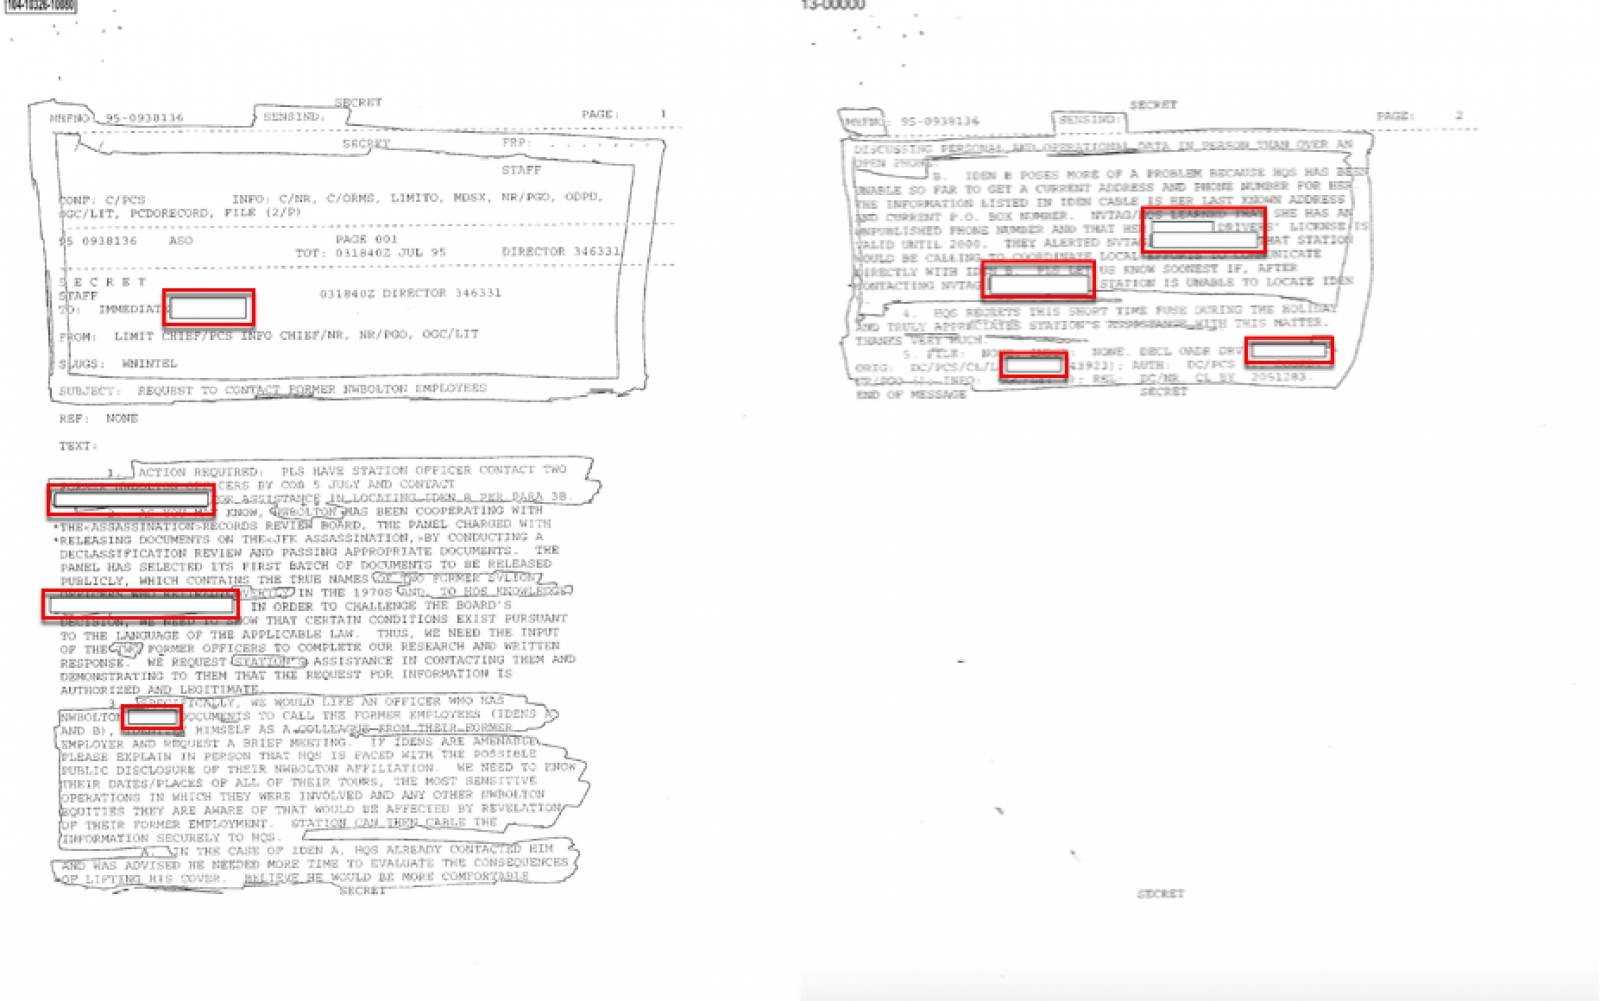 JFK Records Release:	Why the Redactions?